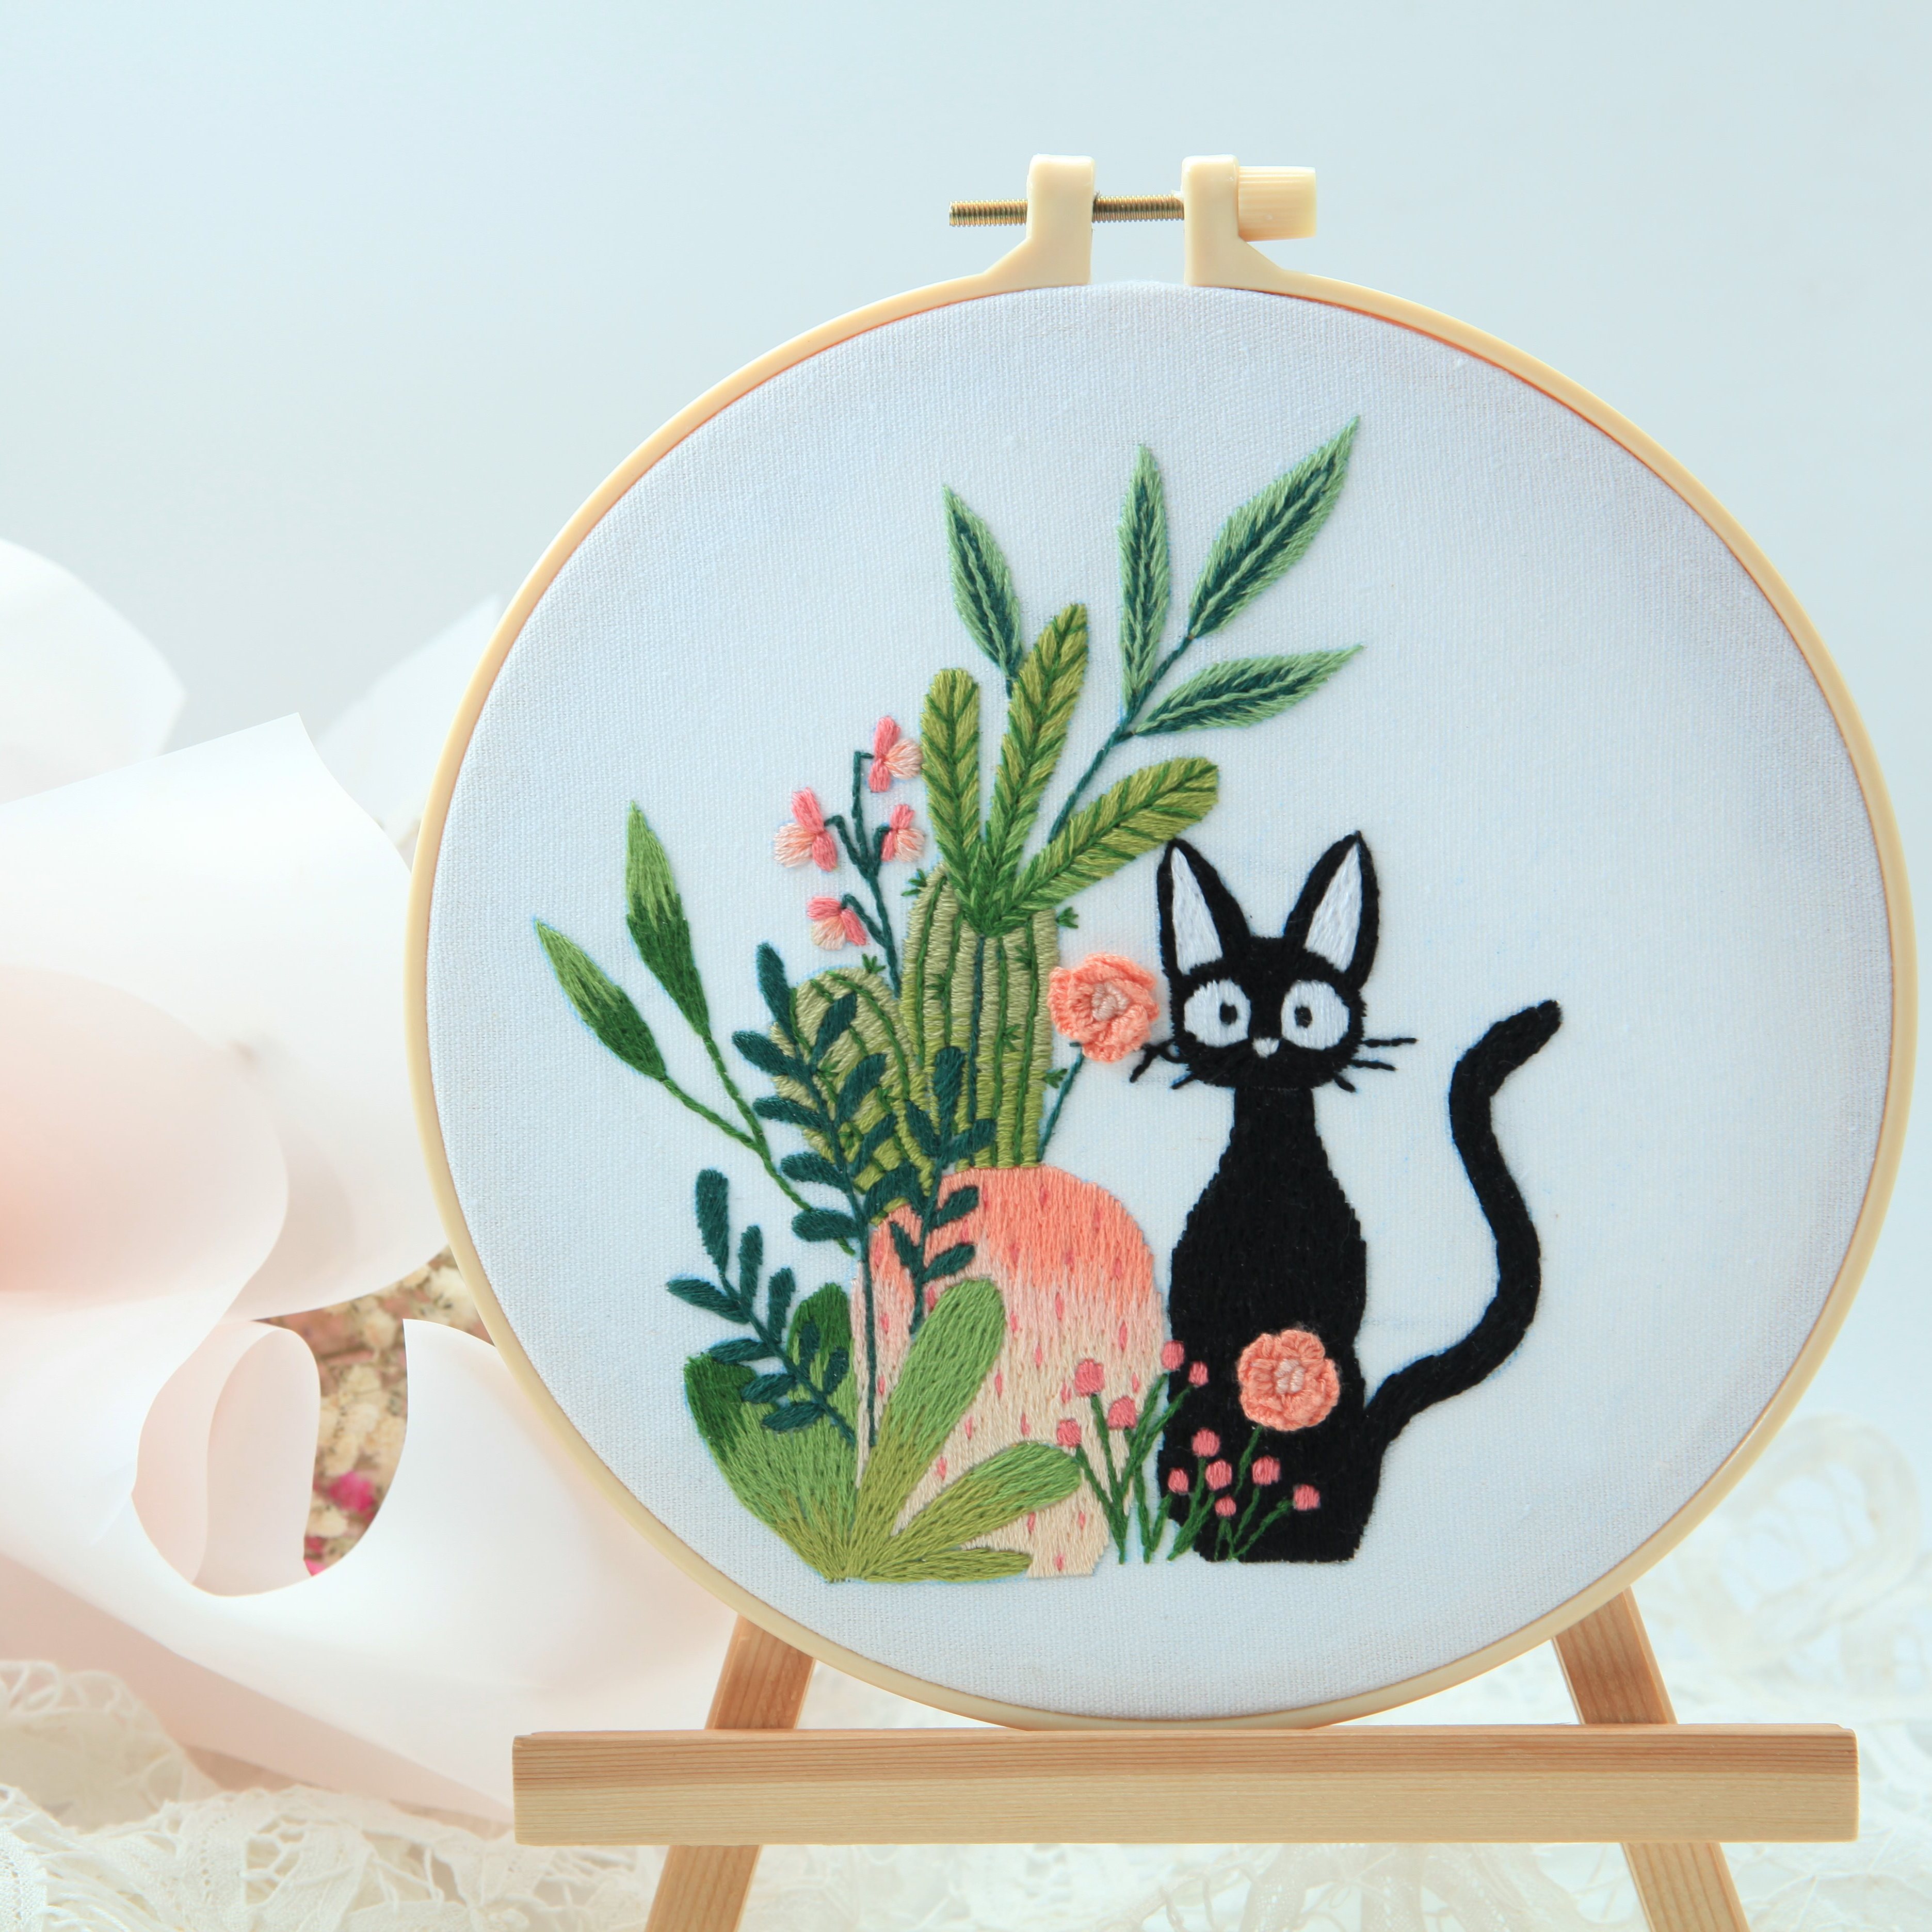 Cat Theme Embroidery Kit For Beginners, Cat Pattern Adults Cross